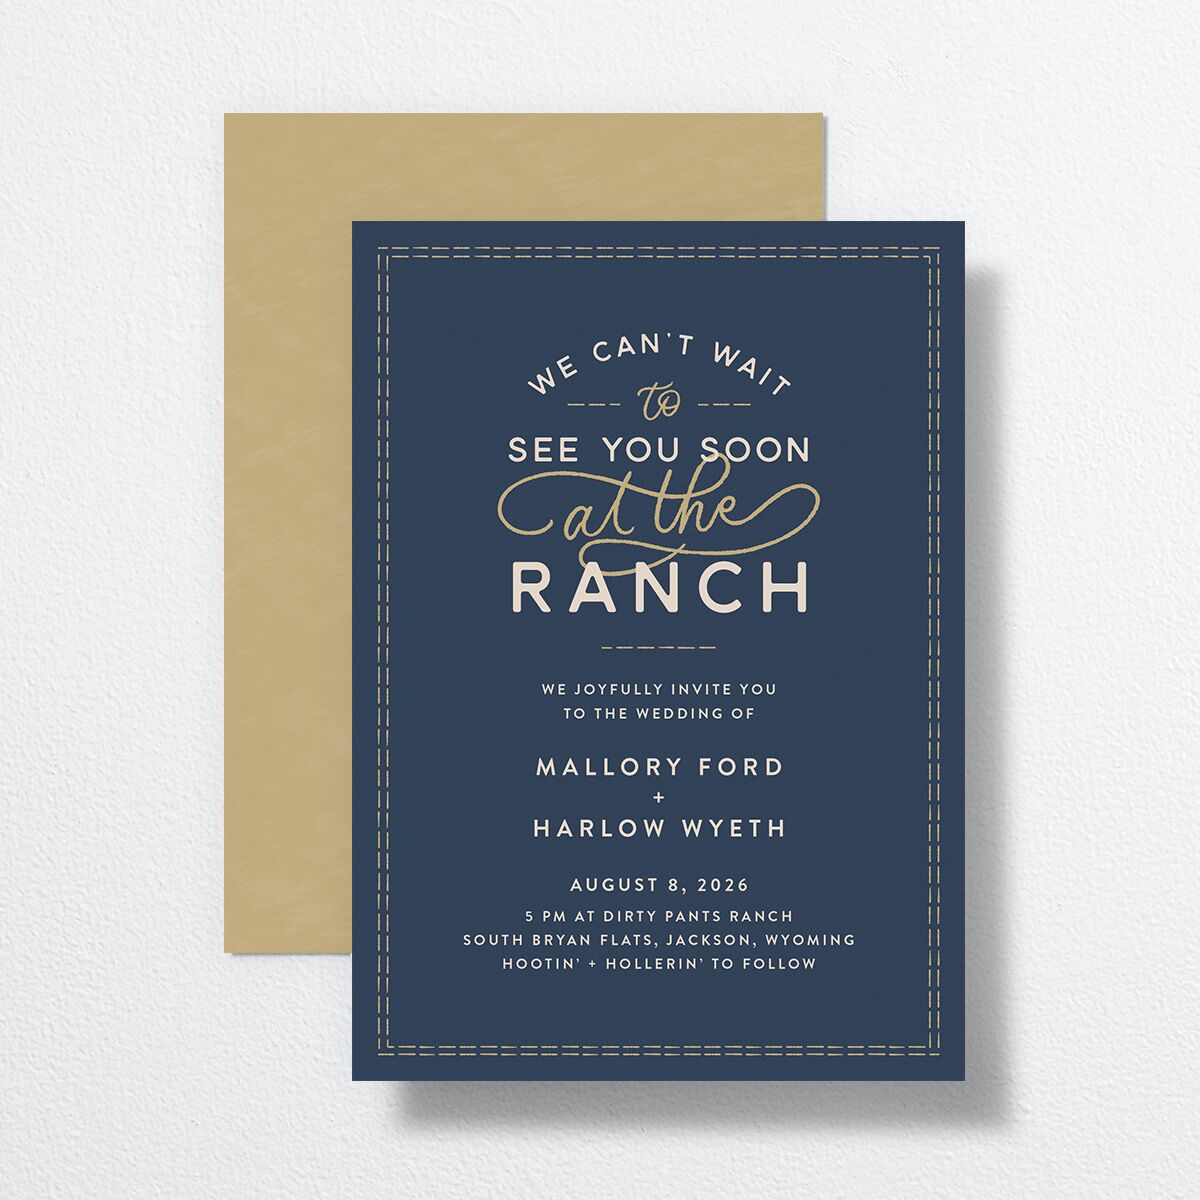 Rustic Ranch Wedding Invitations front-and-back in blue